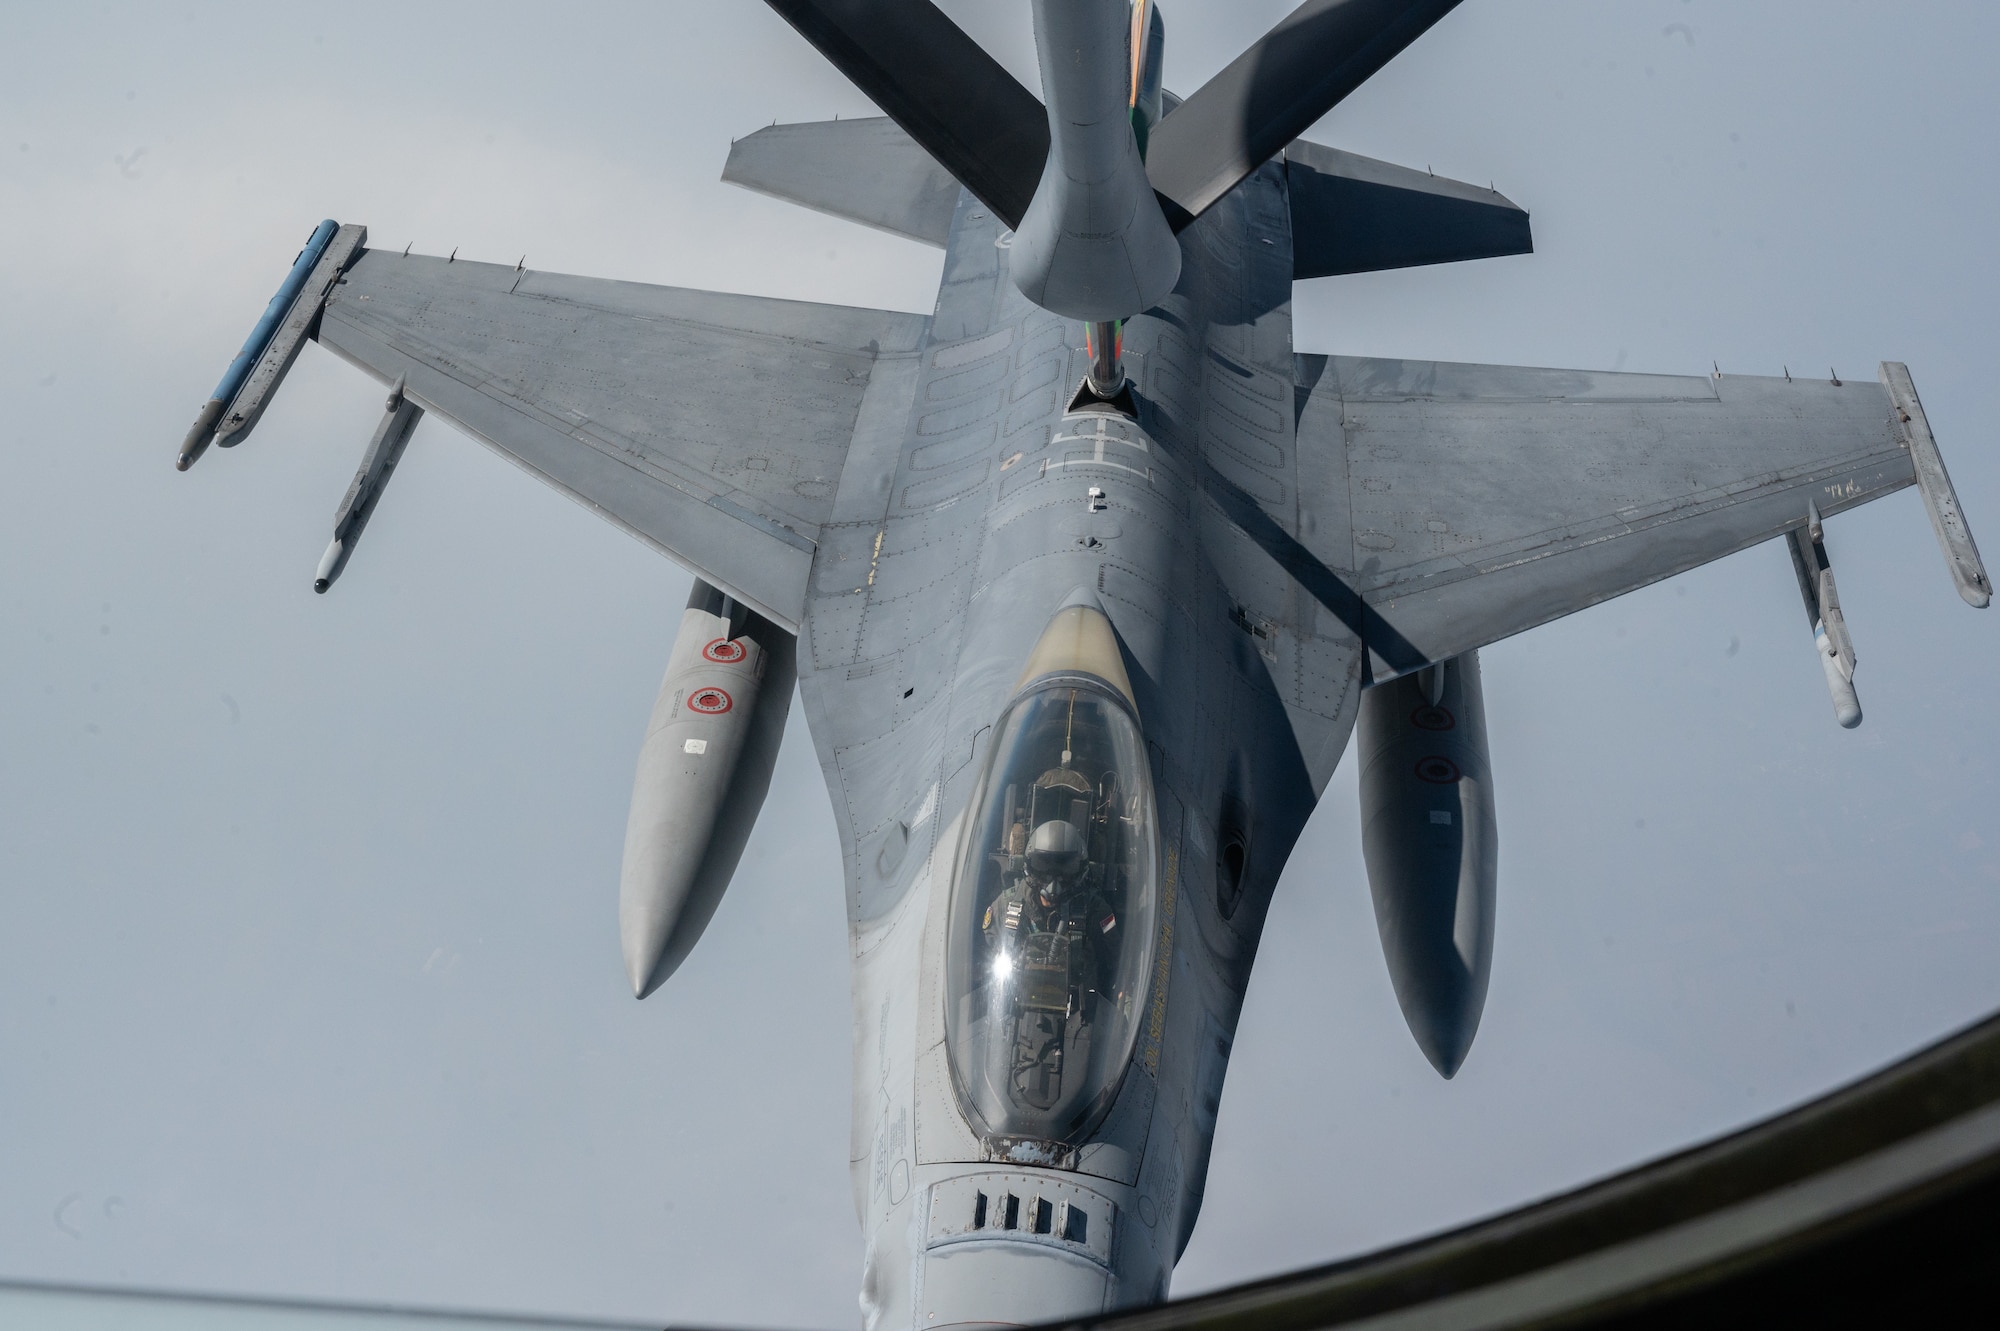 A Republic of Singapore Air Force F-16 gets refueled by a Washington Air National Guard KC-135 Stratotanker during Cope Tiger 2024, Korat Royal Thai Air Base, Thailand, March 26, 2024. Cope Tiger builds relationships and promotes our capacity for security and interoperability by demonstrating our regional commitment. (U.S. Air Force photo by Tech. Sgt. Hailey Haux)